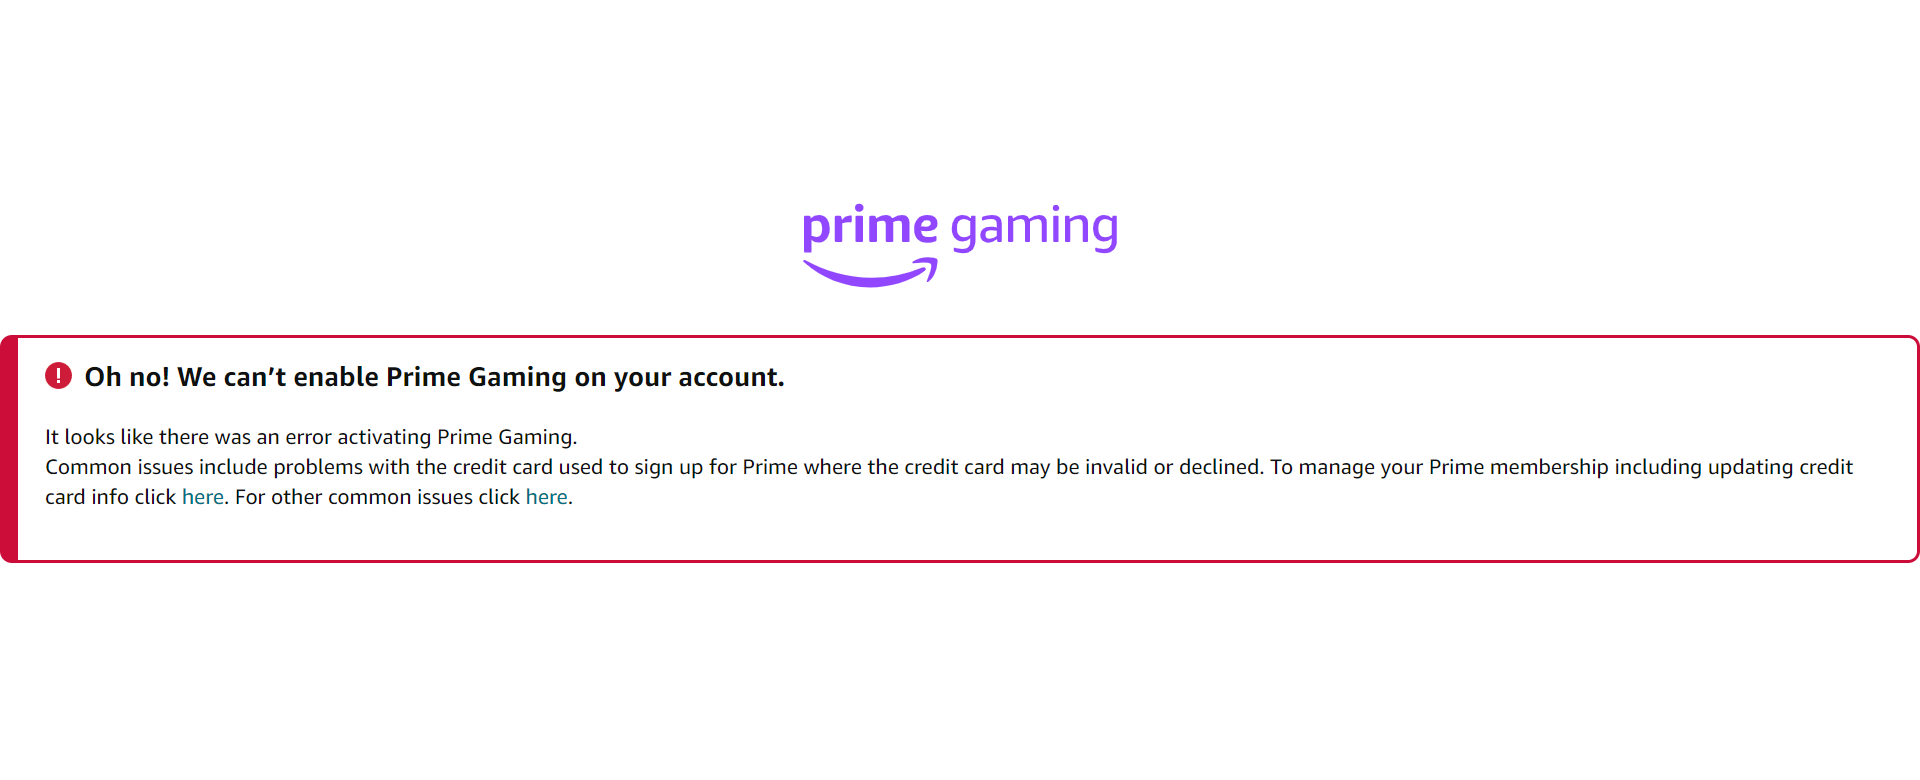 Prime Gaming: everything you need to know